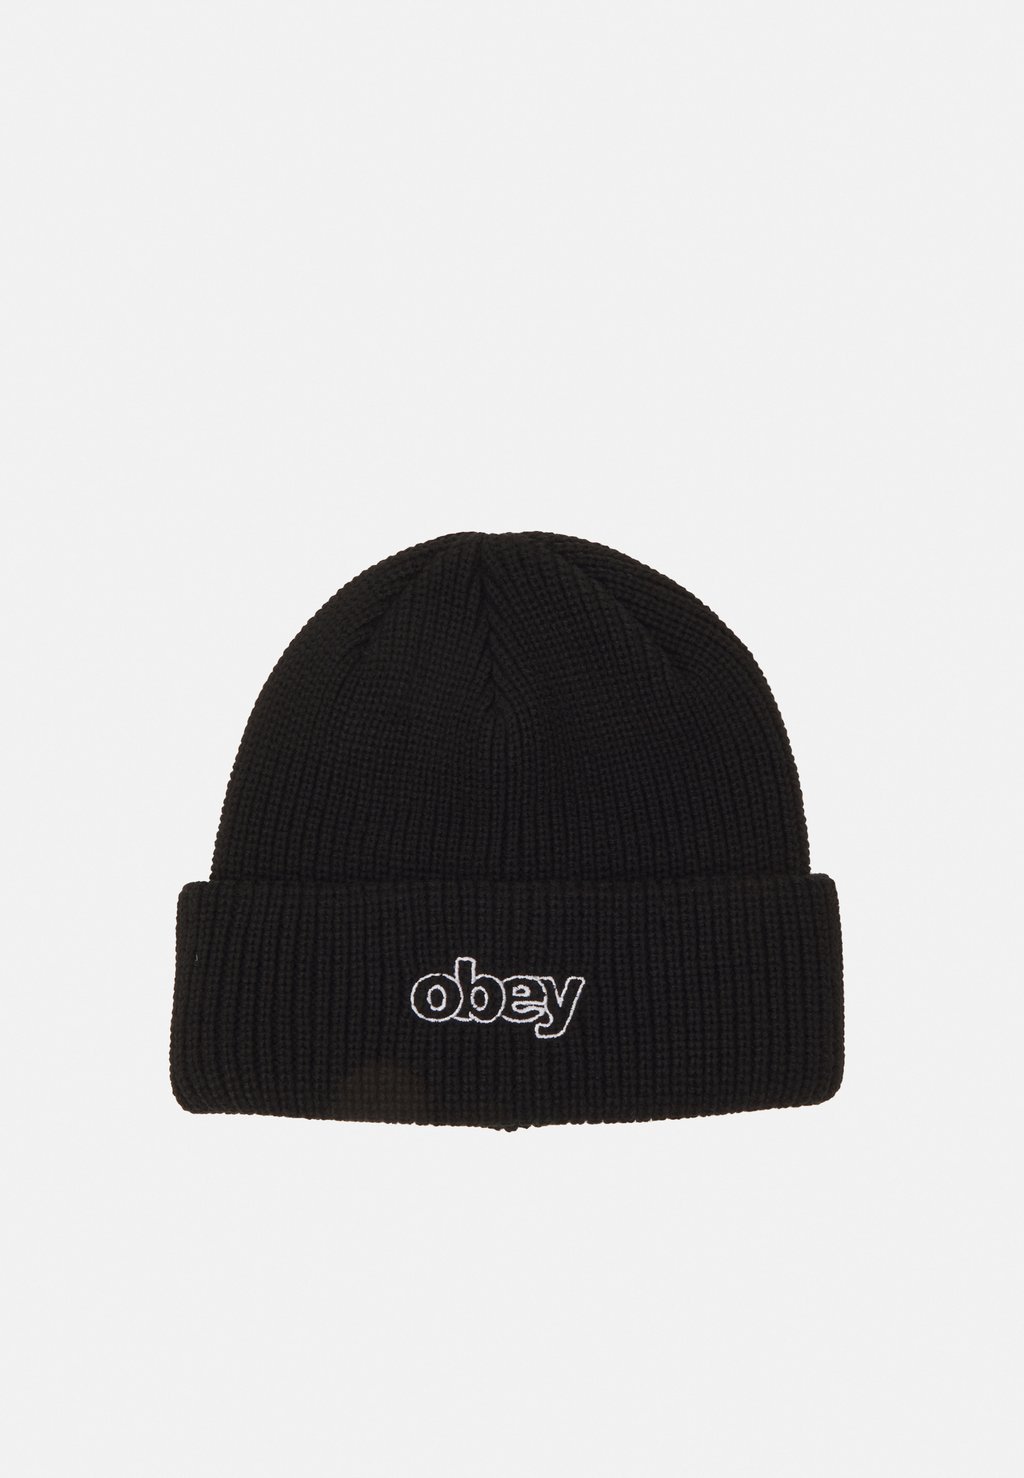 Шапка Obey Clothing THROWBACK BEANIE, черный шапка obey micro beanie black